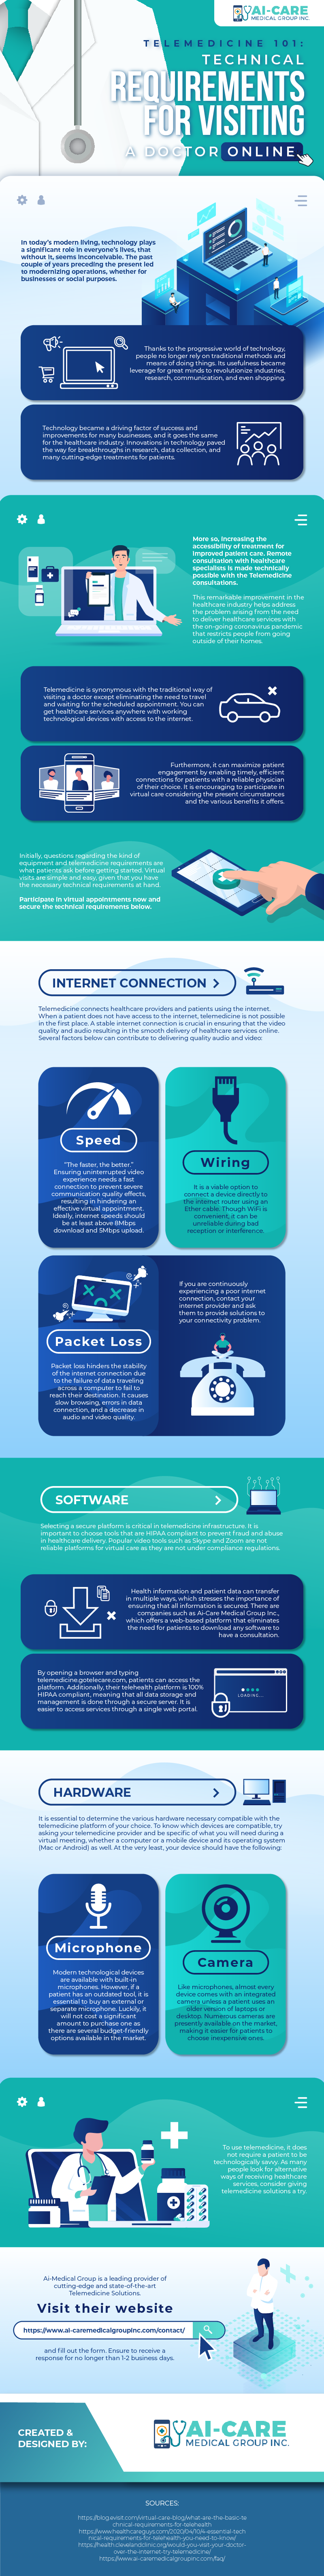 Telemedicine 101:Technical Requirements for Visiting a Doctor Online infographic